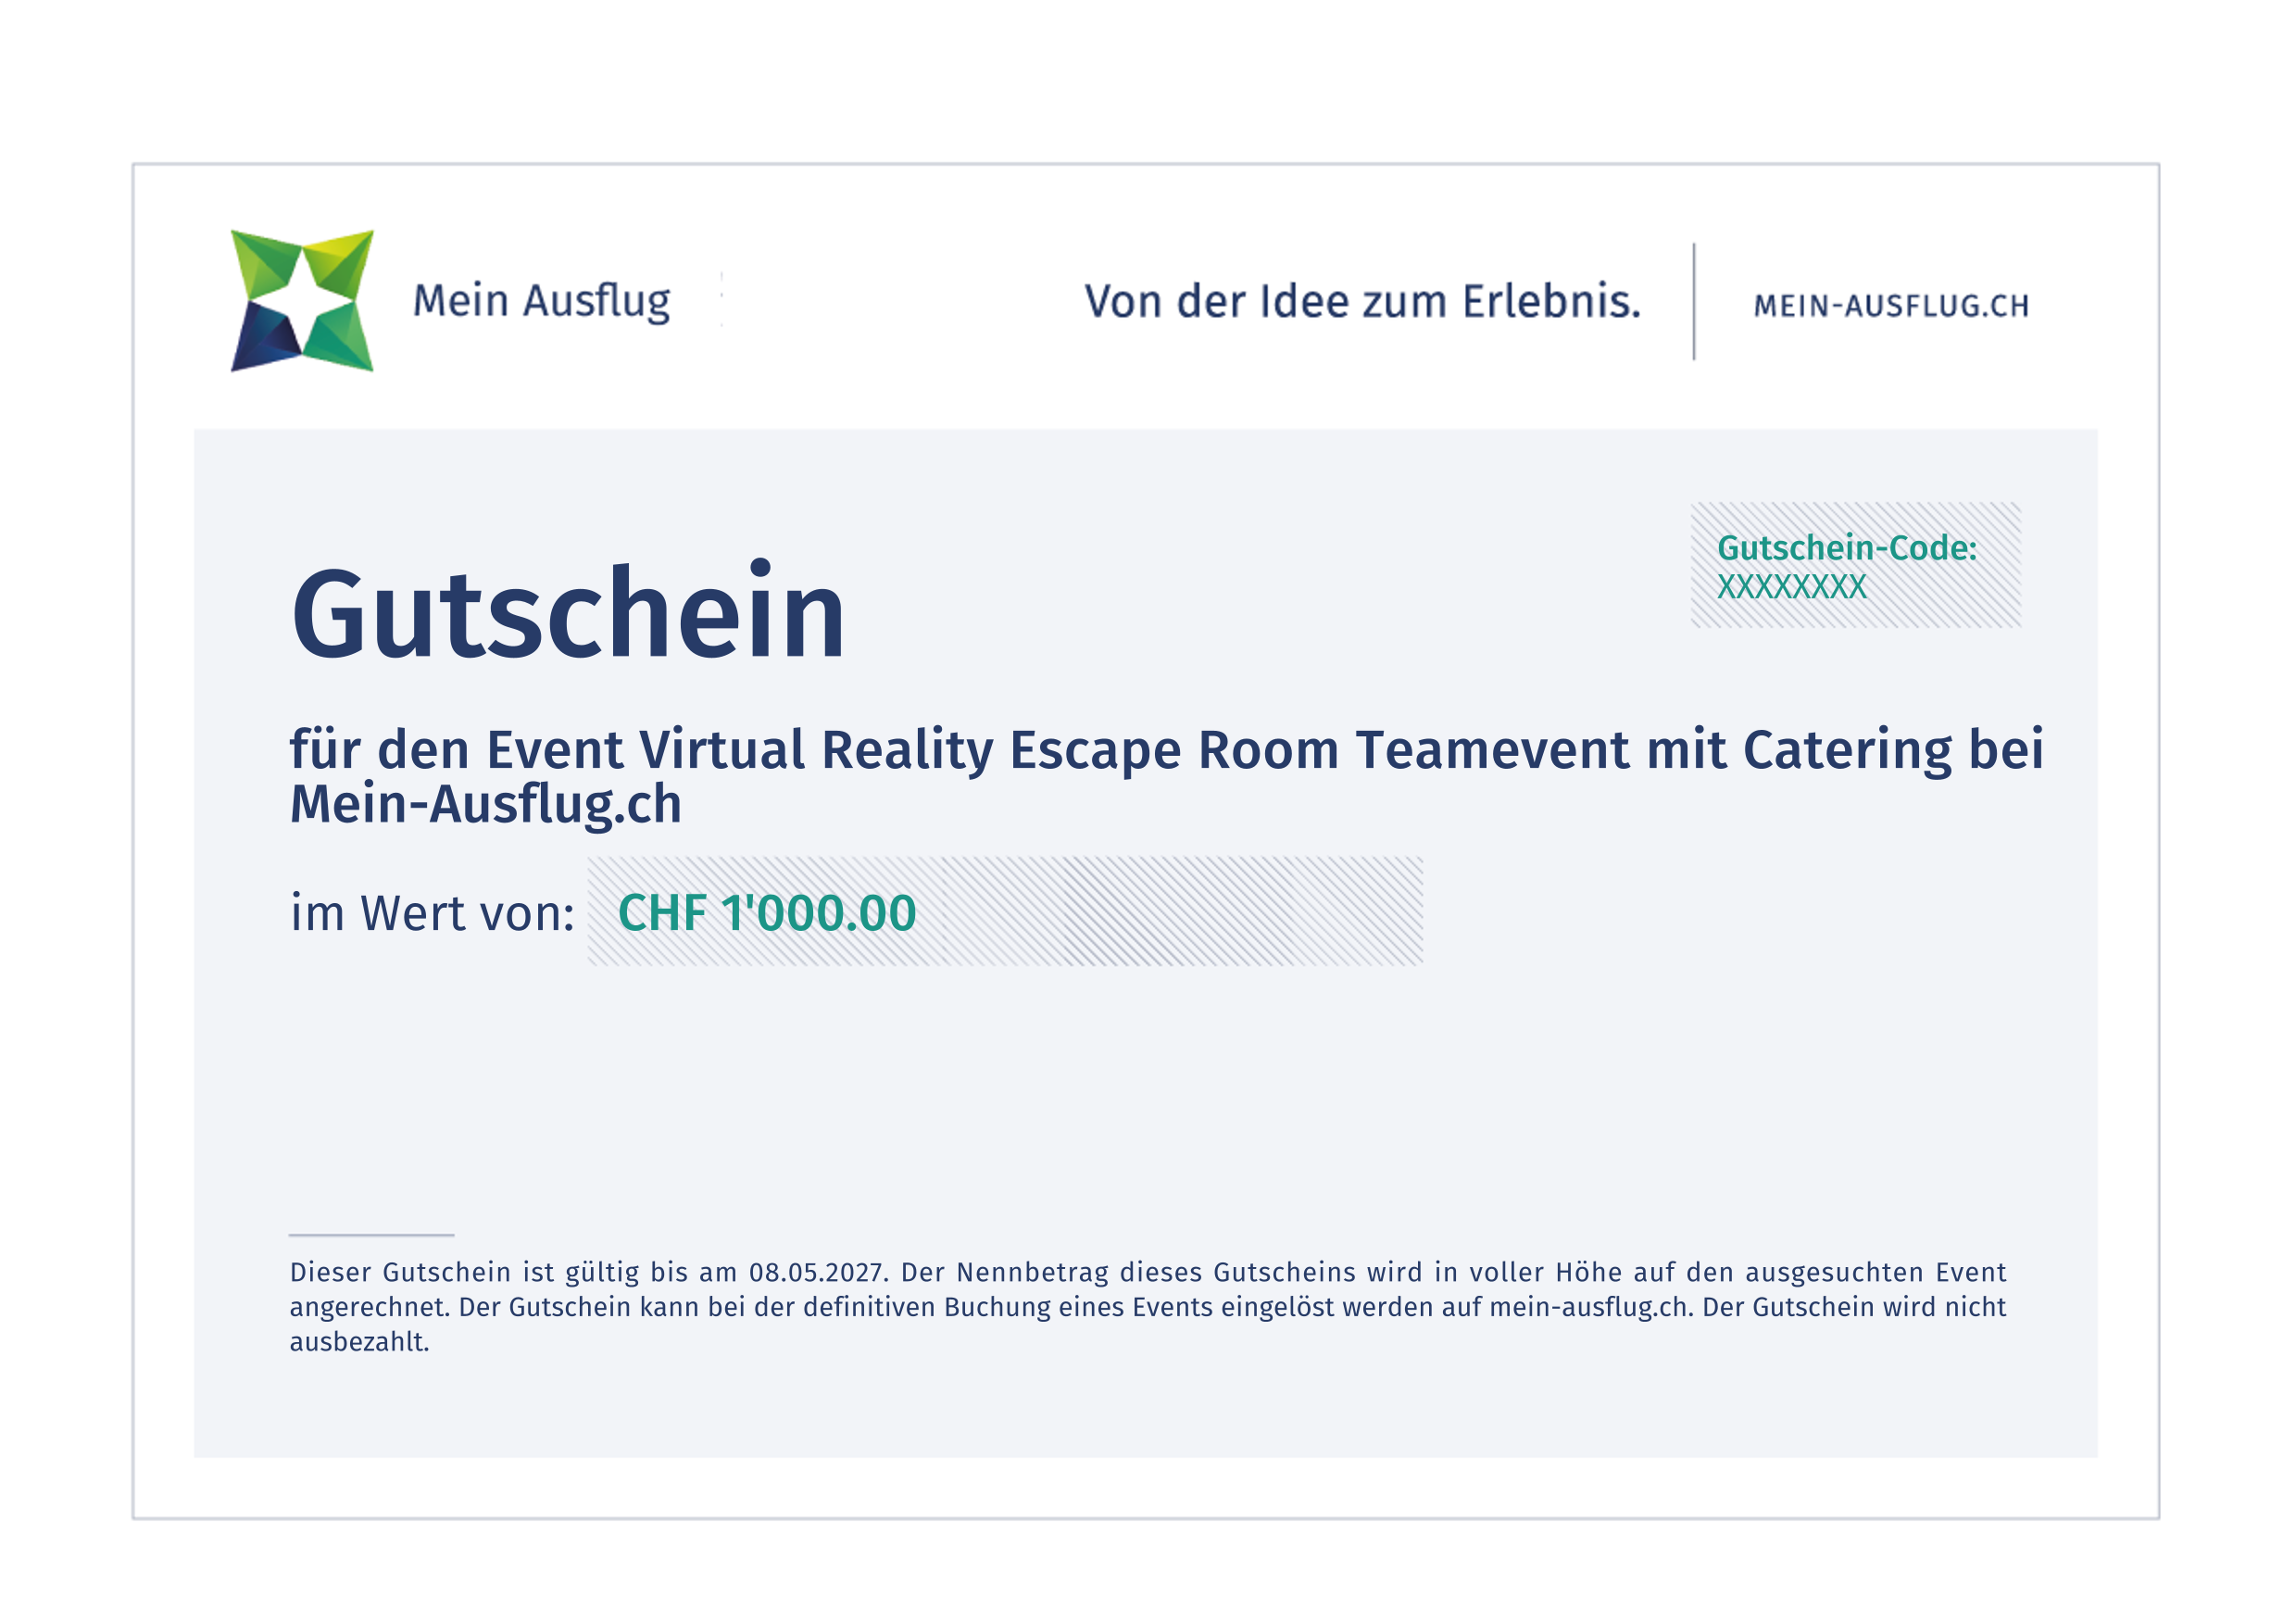 Virtual Reality Escape Room Teamevent mit Catering